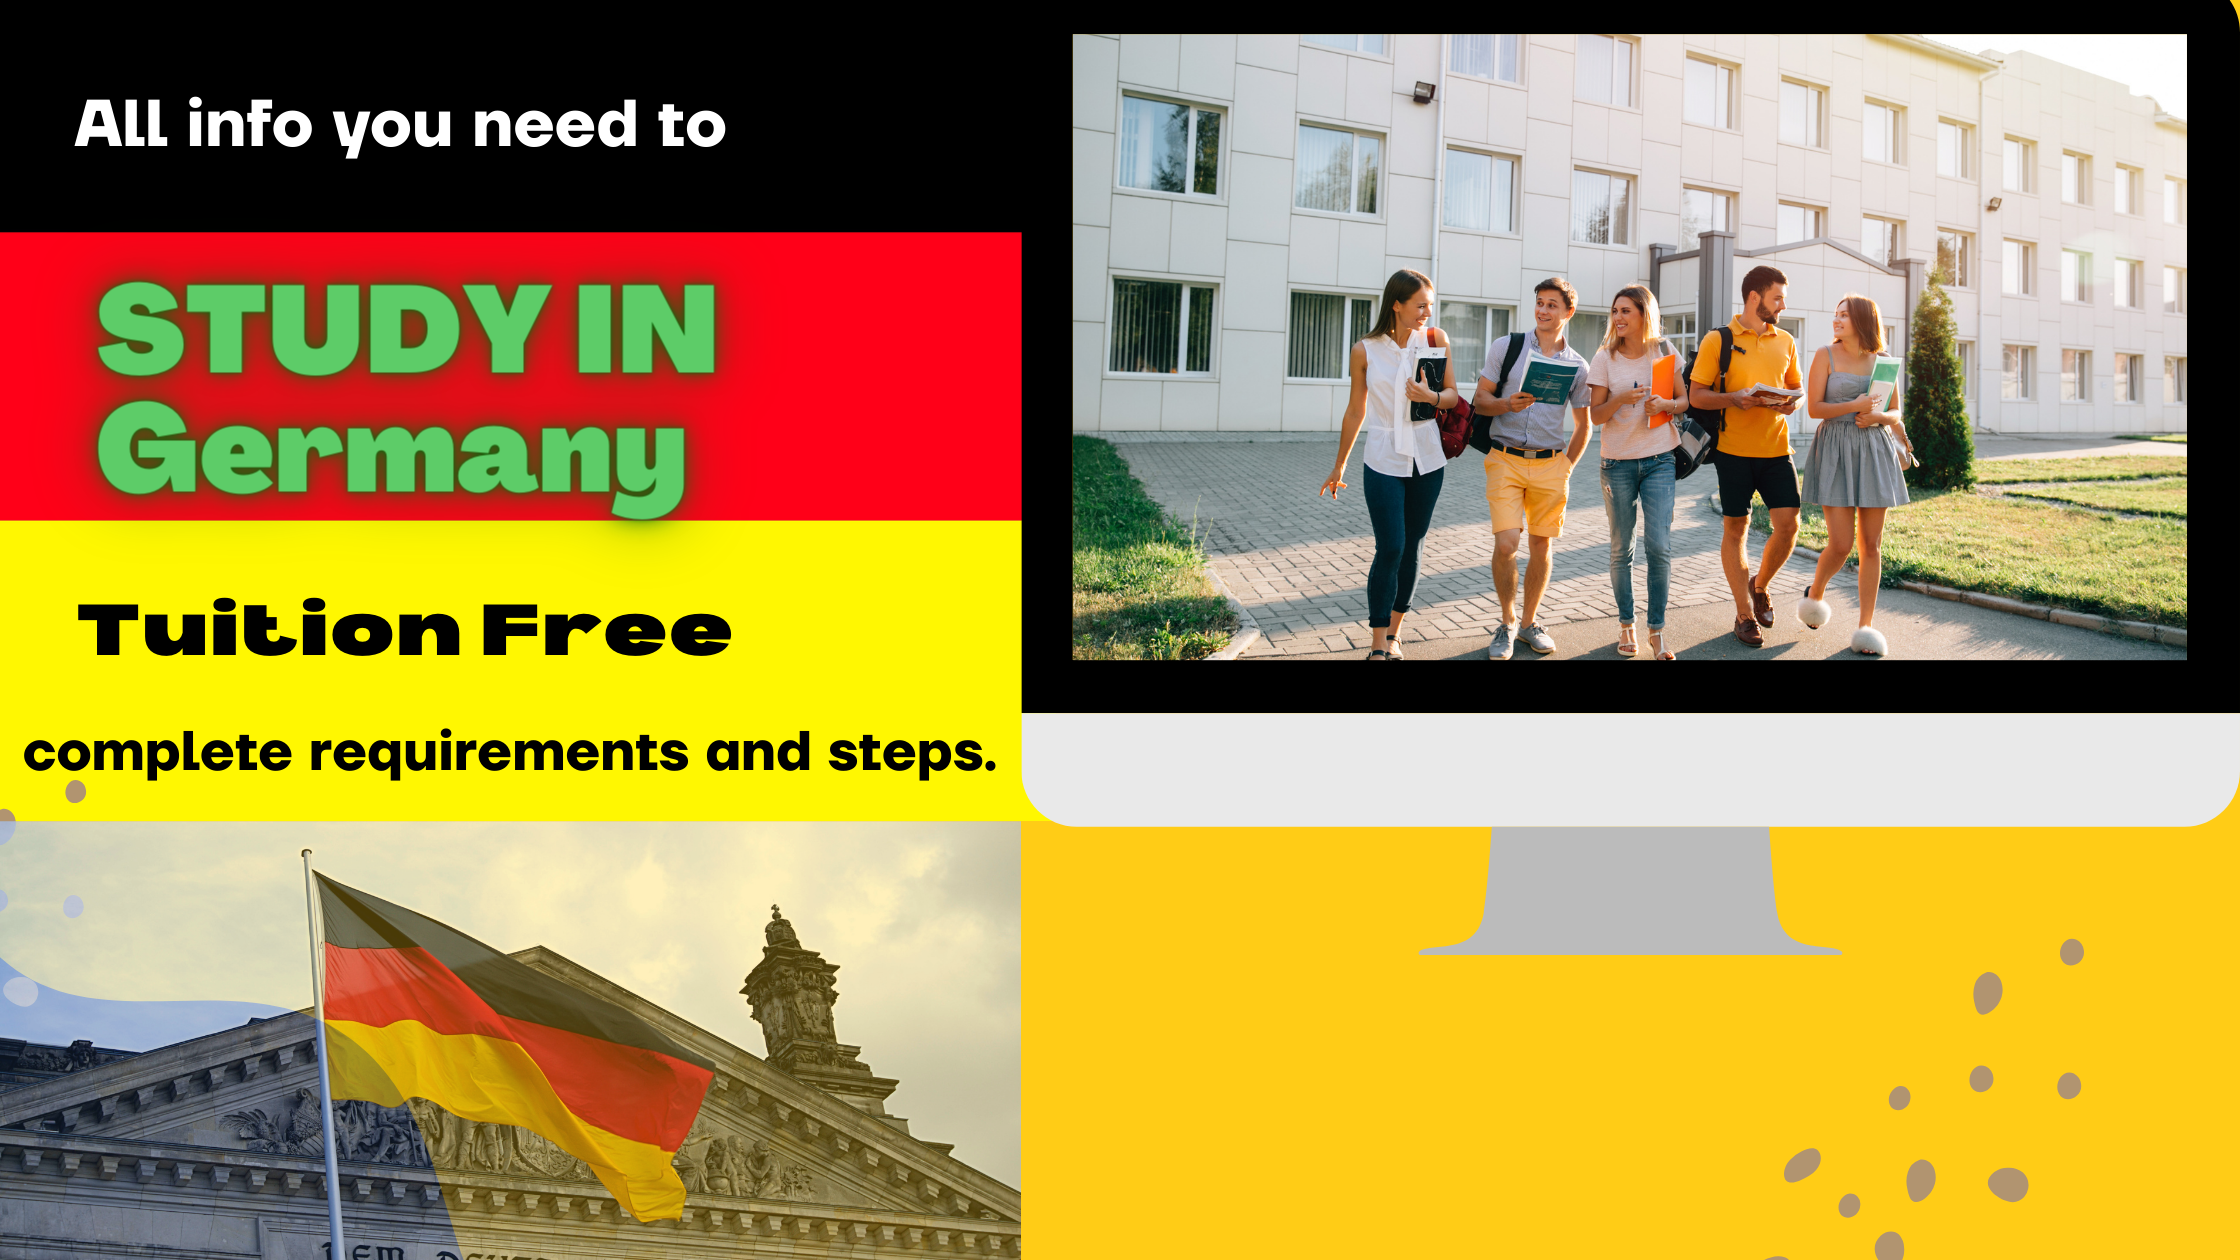 How to study free in Germany 2